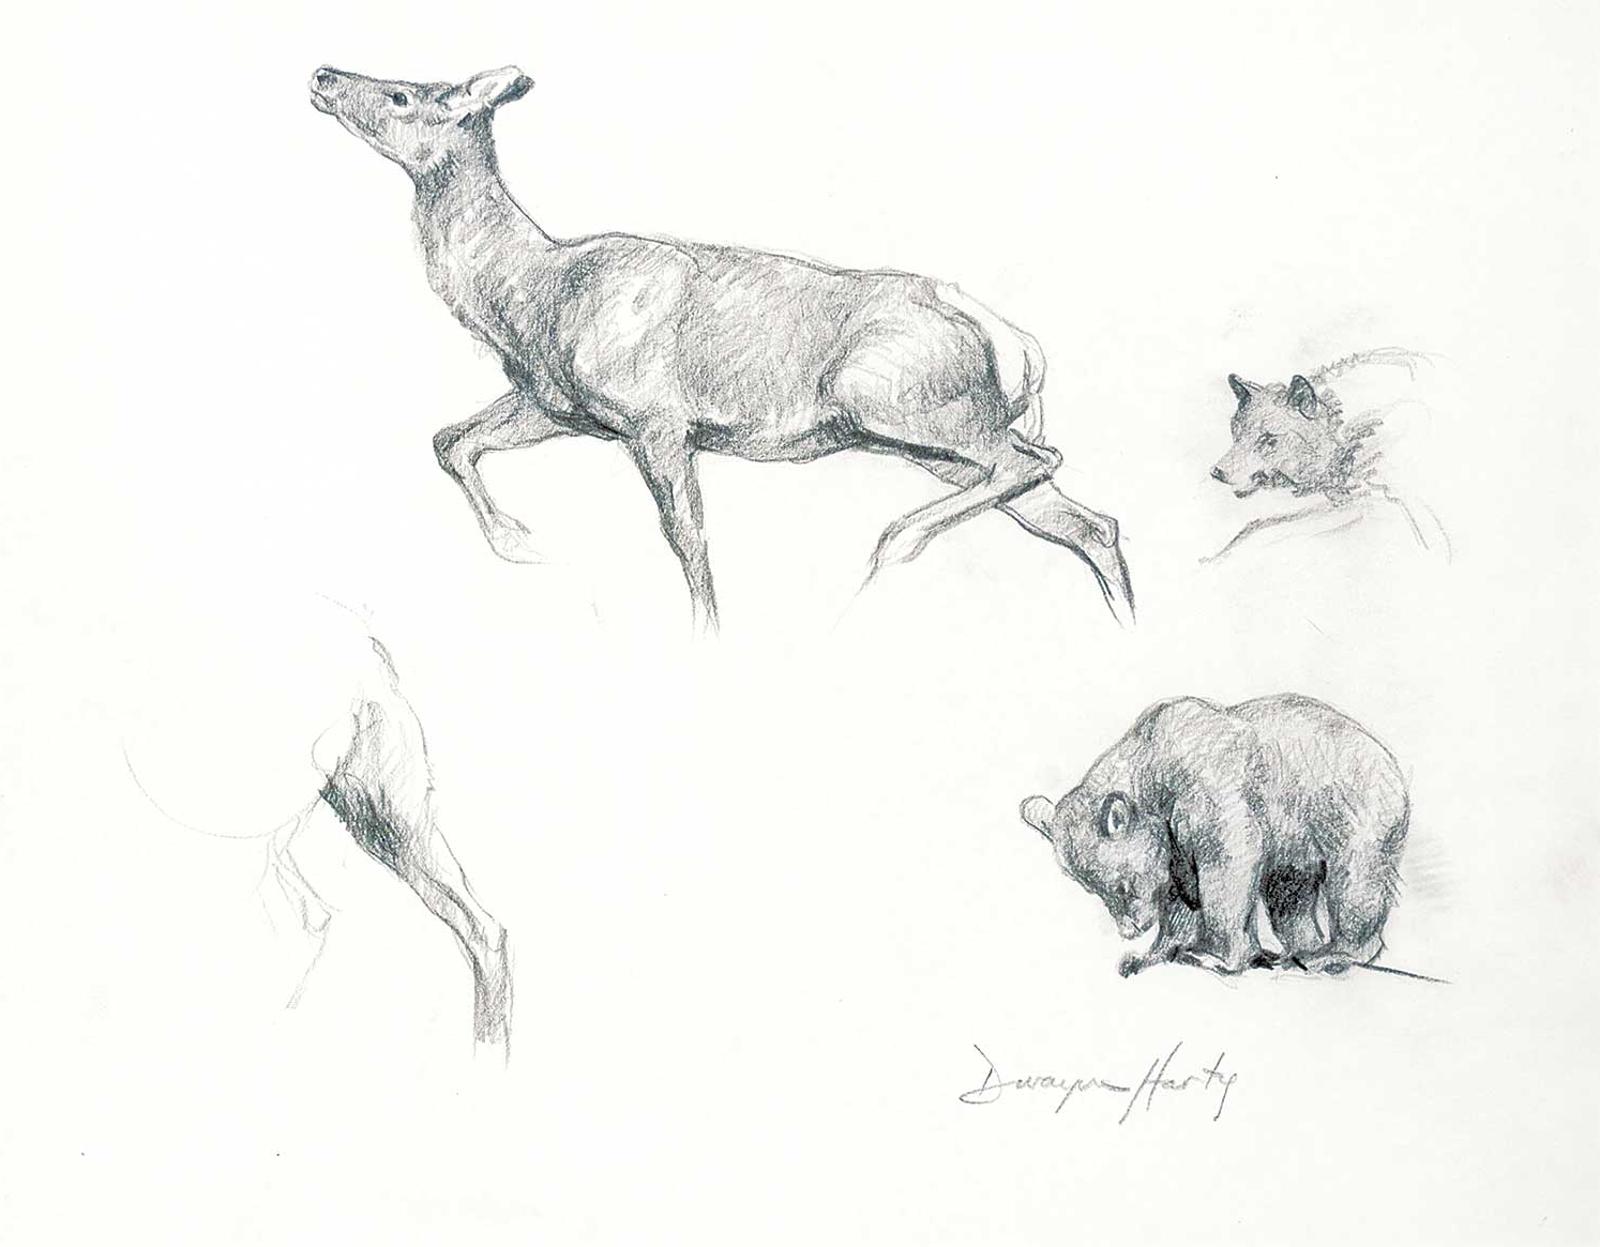 Dwayne Harty (1957) - Untitled - Bear and Deer Study